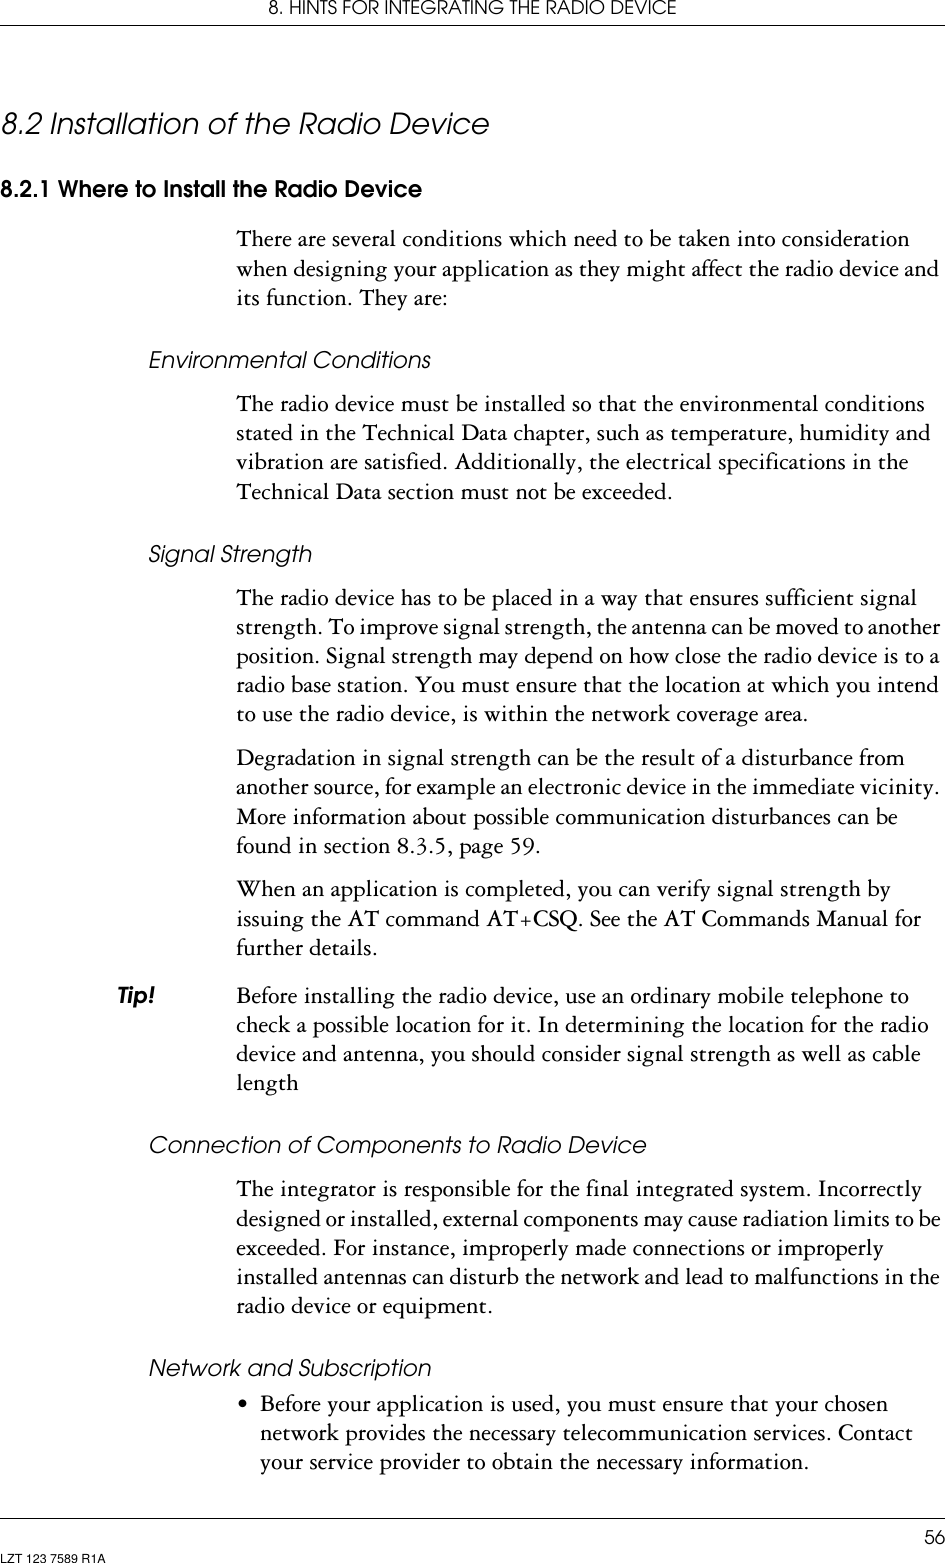 8. HINTS FOR INTEGRATING THE RADIO DEVICE56LZT 123 7589 R1A8.2 Installation of the Radio Device8.2.1 Where to Install the Radio DeviceThere are several conditions which need to be taken into consideration when designing your application as they might affect the radio device and its function. They are:Environmental ConditionsThe radio device must be installed so that the environmental conditions stated in the Technical Data chapter, such as temperature, humidity and vibration are satisfied. Additionally, the electrical specifications in the Technical Data section must not be exceeded.Signal StrengthThe radio device has to be placed in a way that ensures sufficient signal strength. To improve signal strength, the antenna can be moved to another position. Signal strength may depend on how close the radio device is to a radio base station. You must ensure that the location at which you intend to use the radio device, is within the network coverage area. Degradation in signal strength can be the result of a disturbance from another source, for example an electronic device in the immediate vicinity. More information about possible communication disturbances can be found in section 8.3.5, page 59.When an application is completed, you can verify signal strength by issuing the AT command AT+CSQ. See the AT Commands Manual for further details.7LS Before installing the radio device, use an ordinary mobile telephone to check a possible location for it. In determining the location for the radio device and antenna, you should consider signal strength as well as cable lengthConnection of Components to Radio DeviceThe integrator is responsible for the final integrated system. Incorrectly designed or installed, external components may cause radiation limits to be exceeded. For instance, improperly made connections or improperly installed antennas can disturb the network and lead to malfunctions in the radio device or equipment.Network and Subscription• Before your application is used, you must ensure that your chosen network provides the necessary telecommunication services. Contact your service provider to obtain the necessary information.